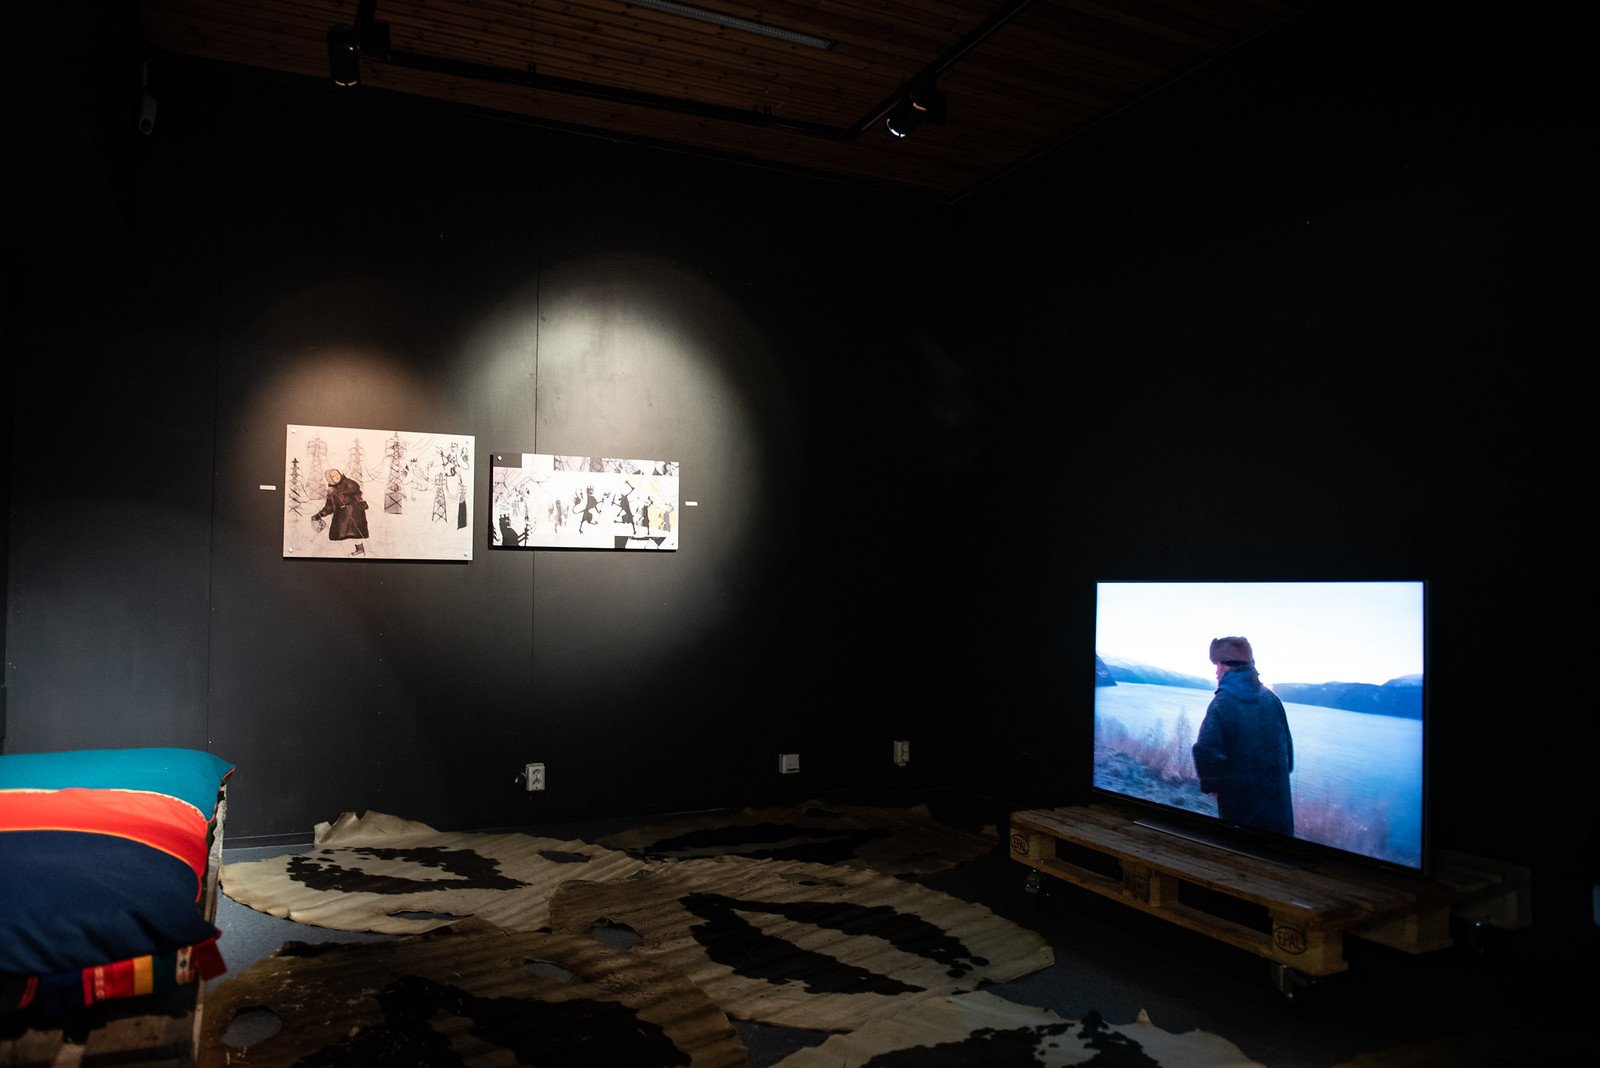  Máret Ánne Sara’s two mixed-media prints on the wall. Looping on the screen to the right is Joar Nango and Ken Are Bongo’s tv-series  Post-Capitalist Architecture-TV . Photo/Govven: Daniel Skog/Riddu Riđđu.  